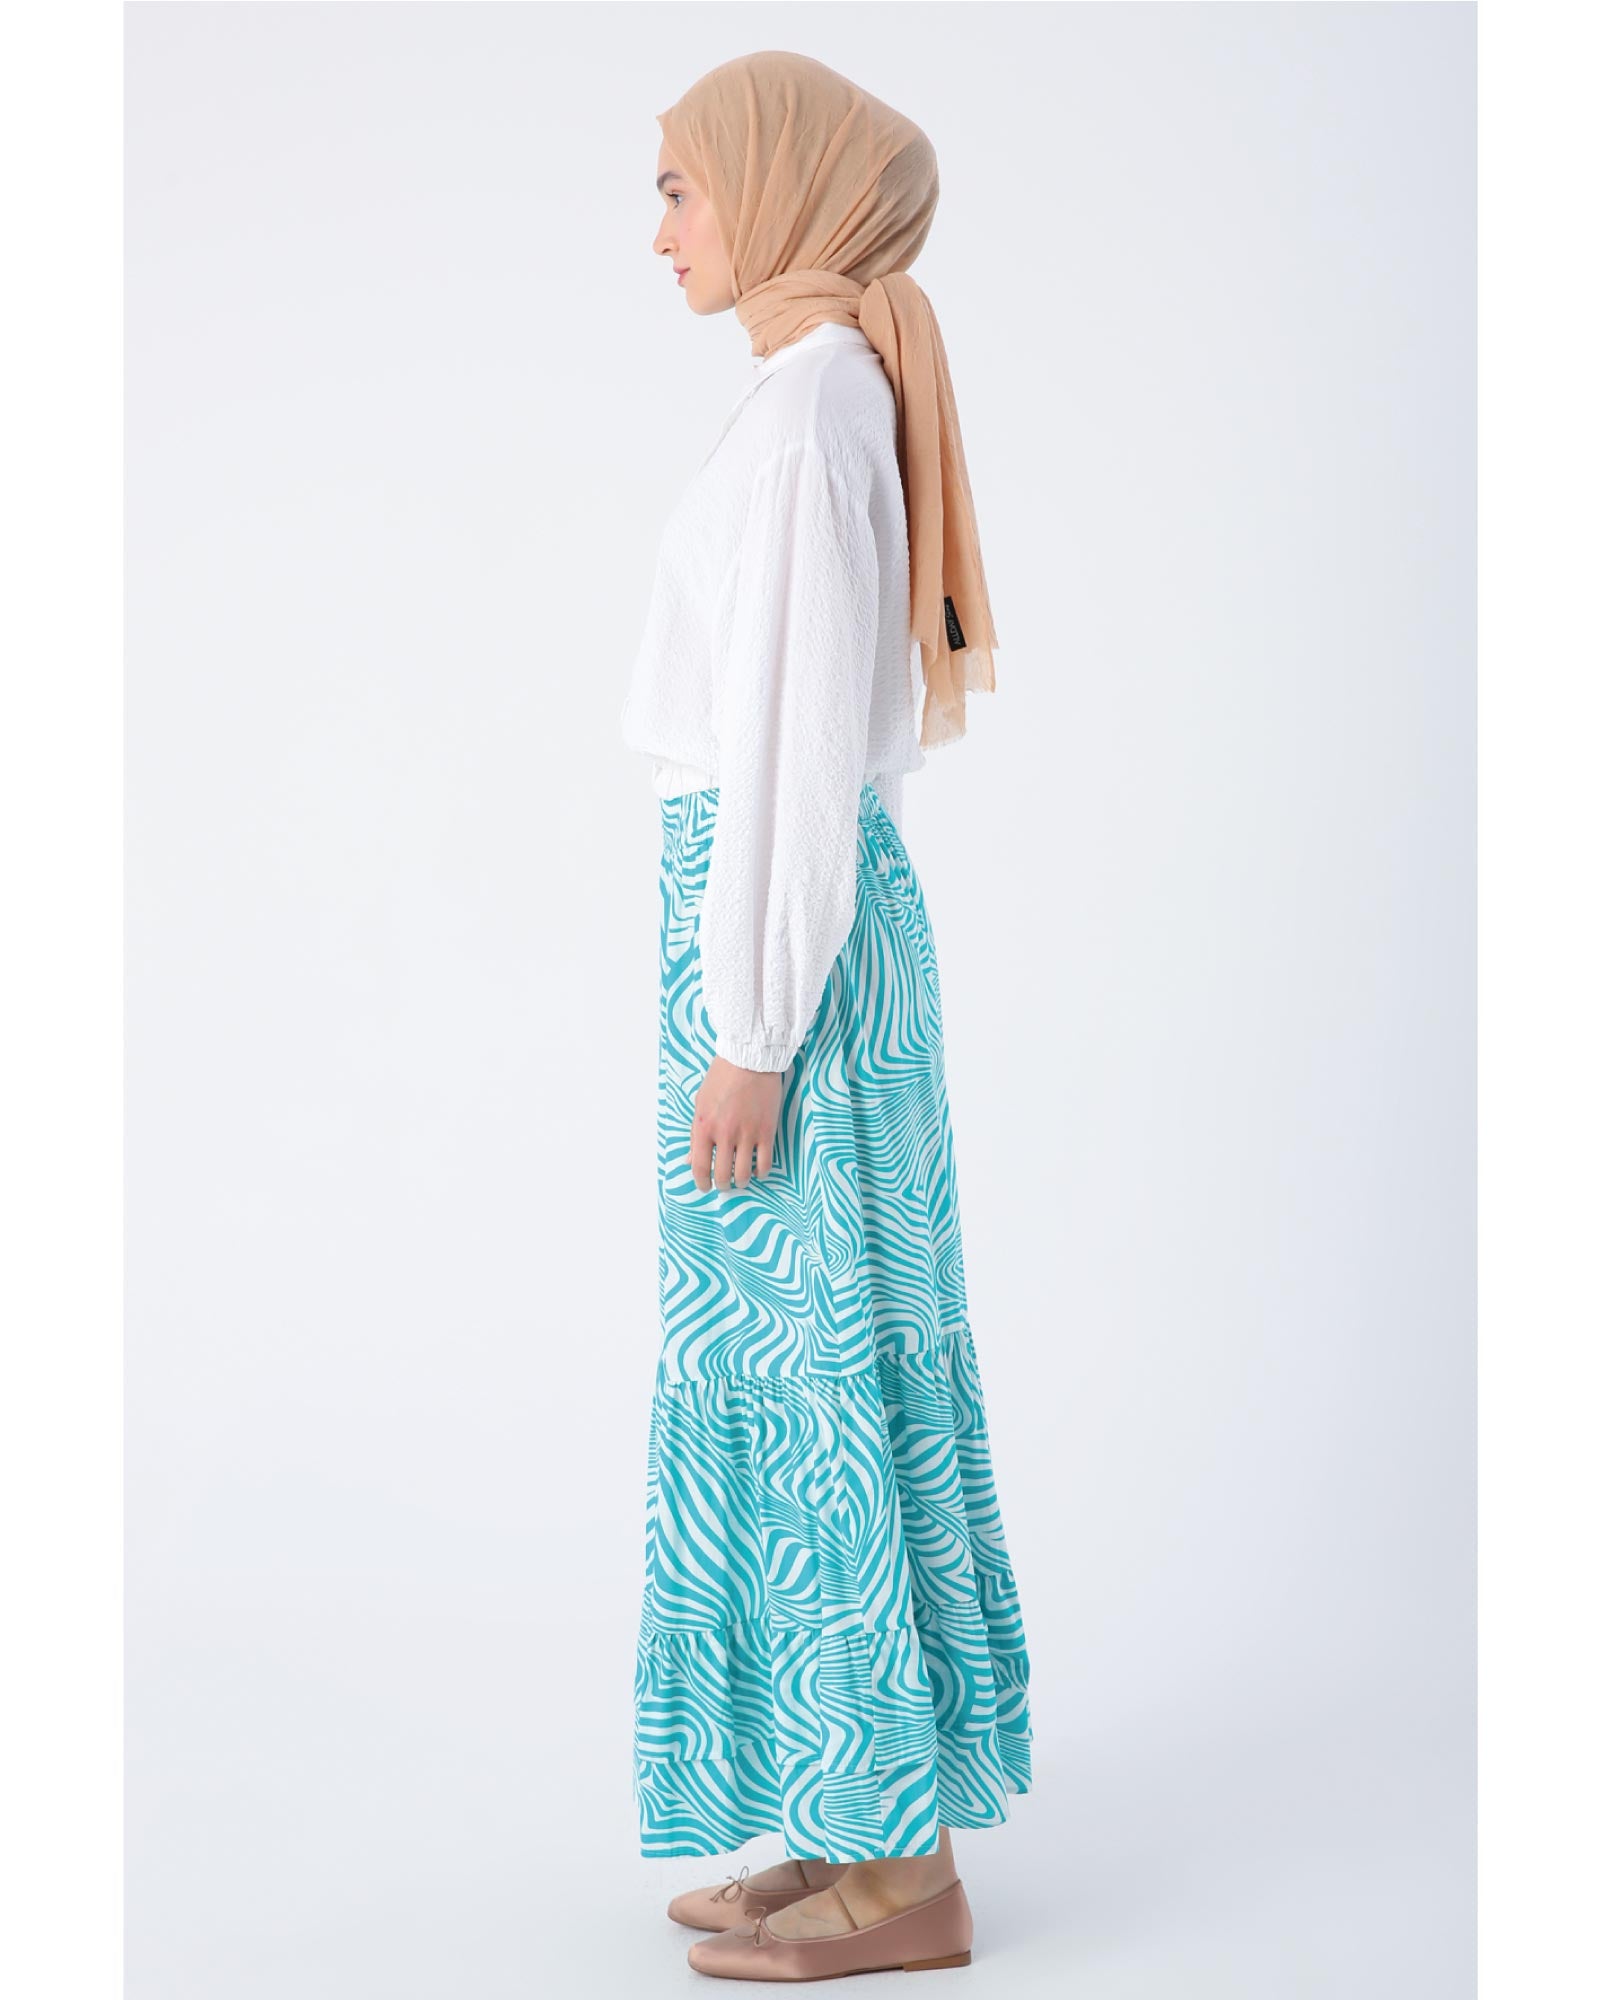 Hijab- 100% cotton printed skirt with gathered details at elastic waistband.